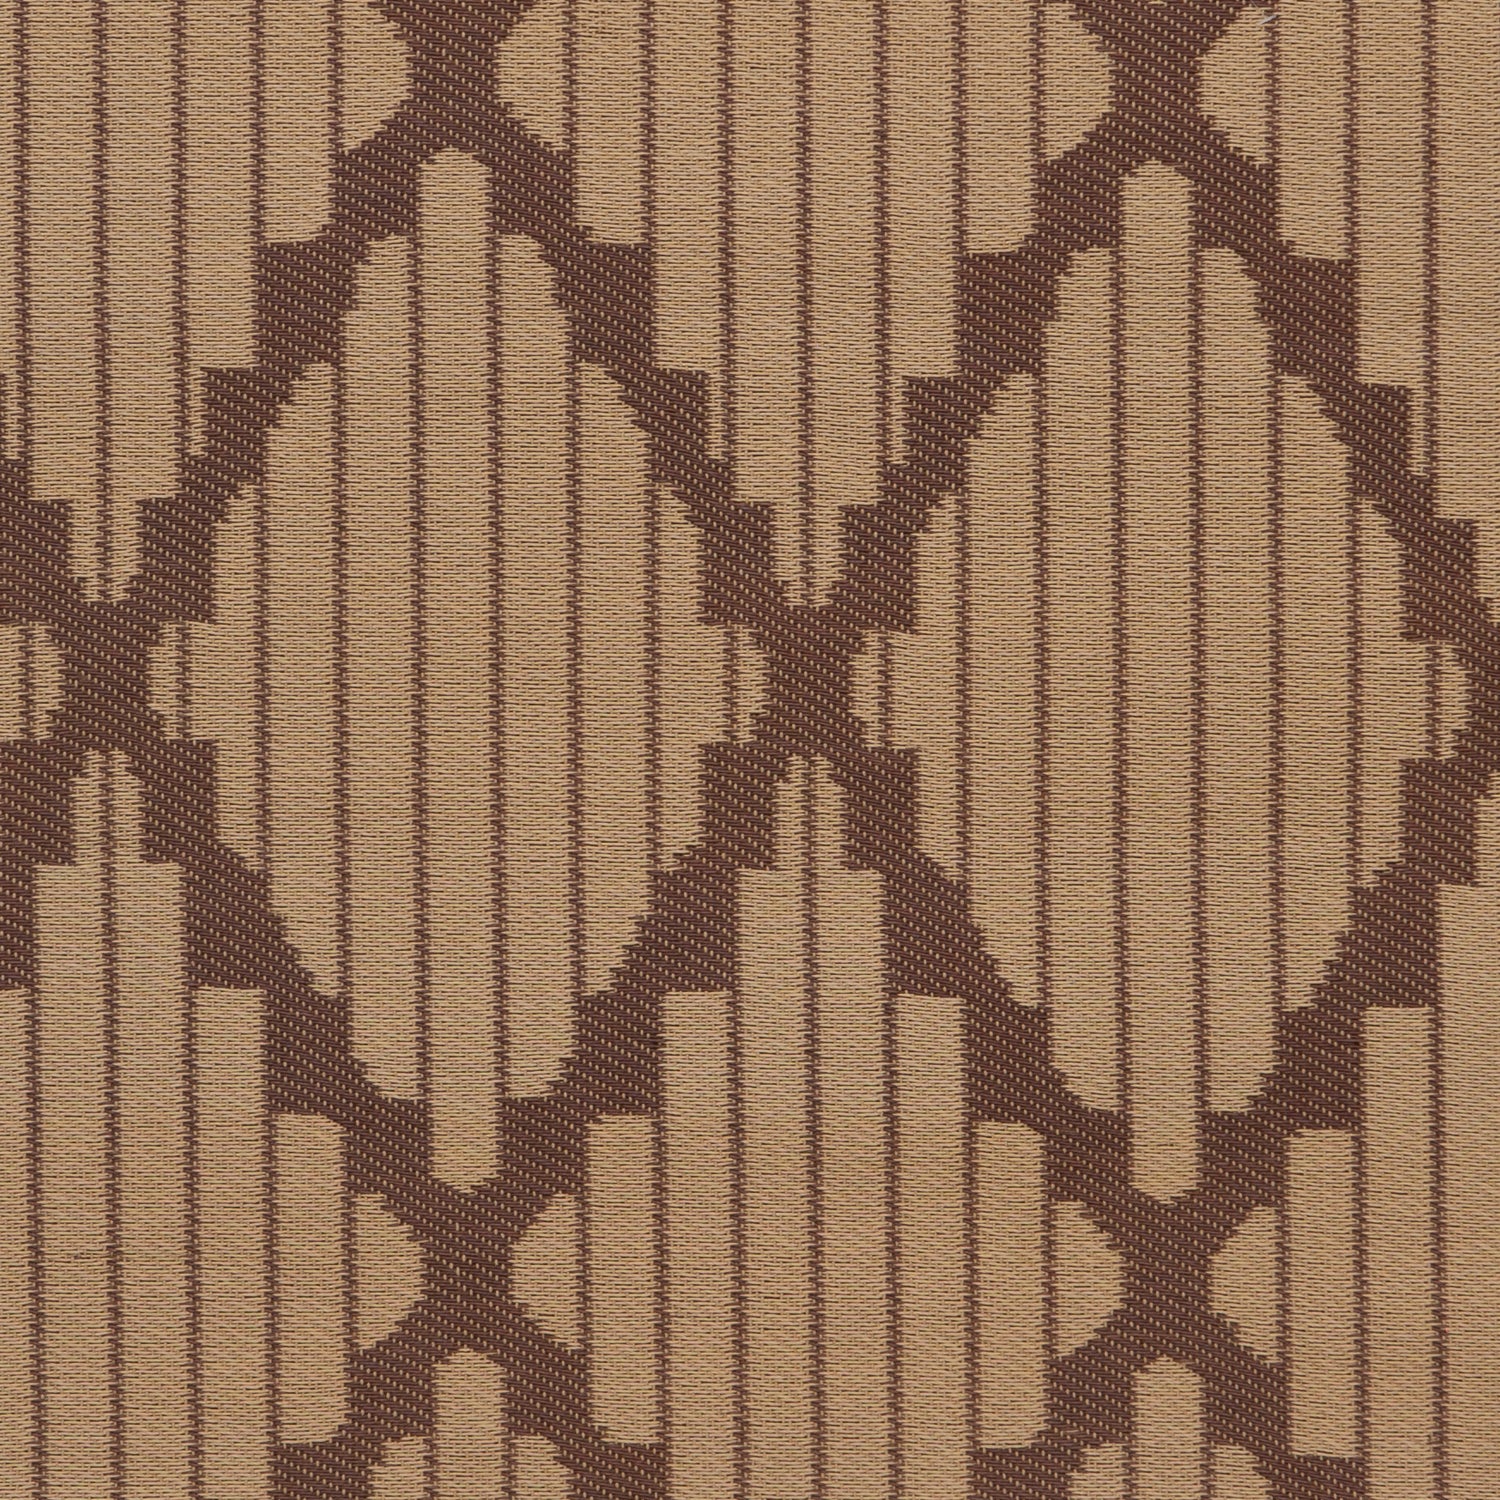 Traditional woven fabric with dark brown geometric patterns on light brown background.